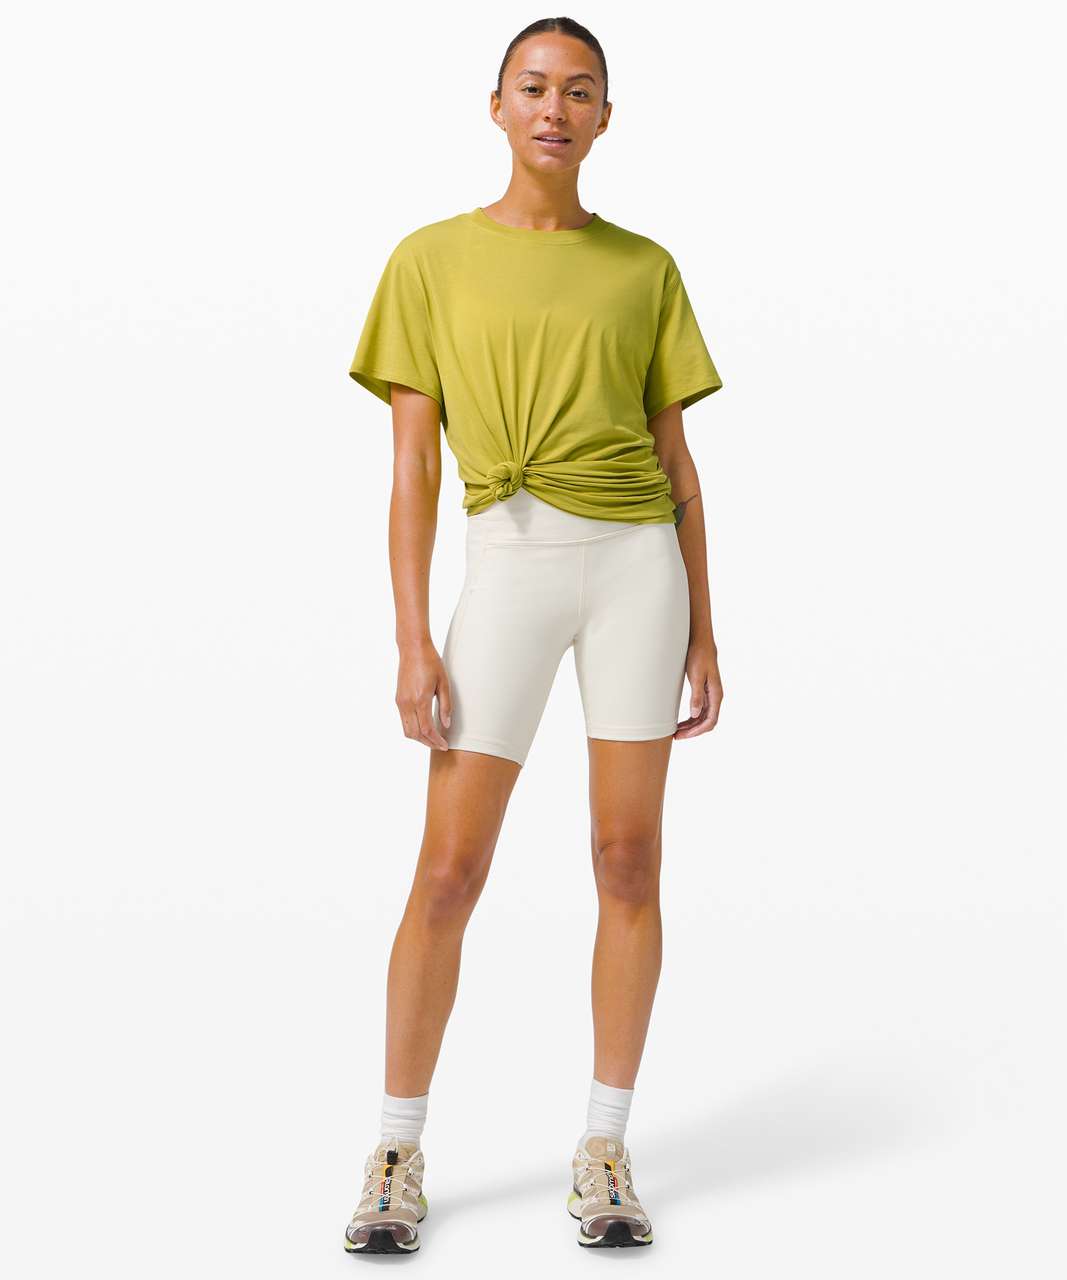 Lululemon All Yours Tee - Yellow Pear